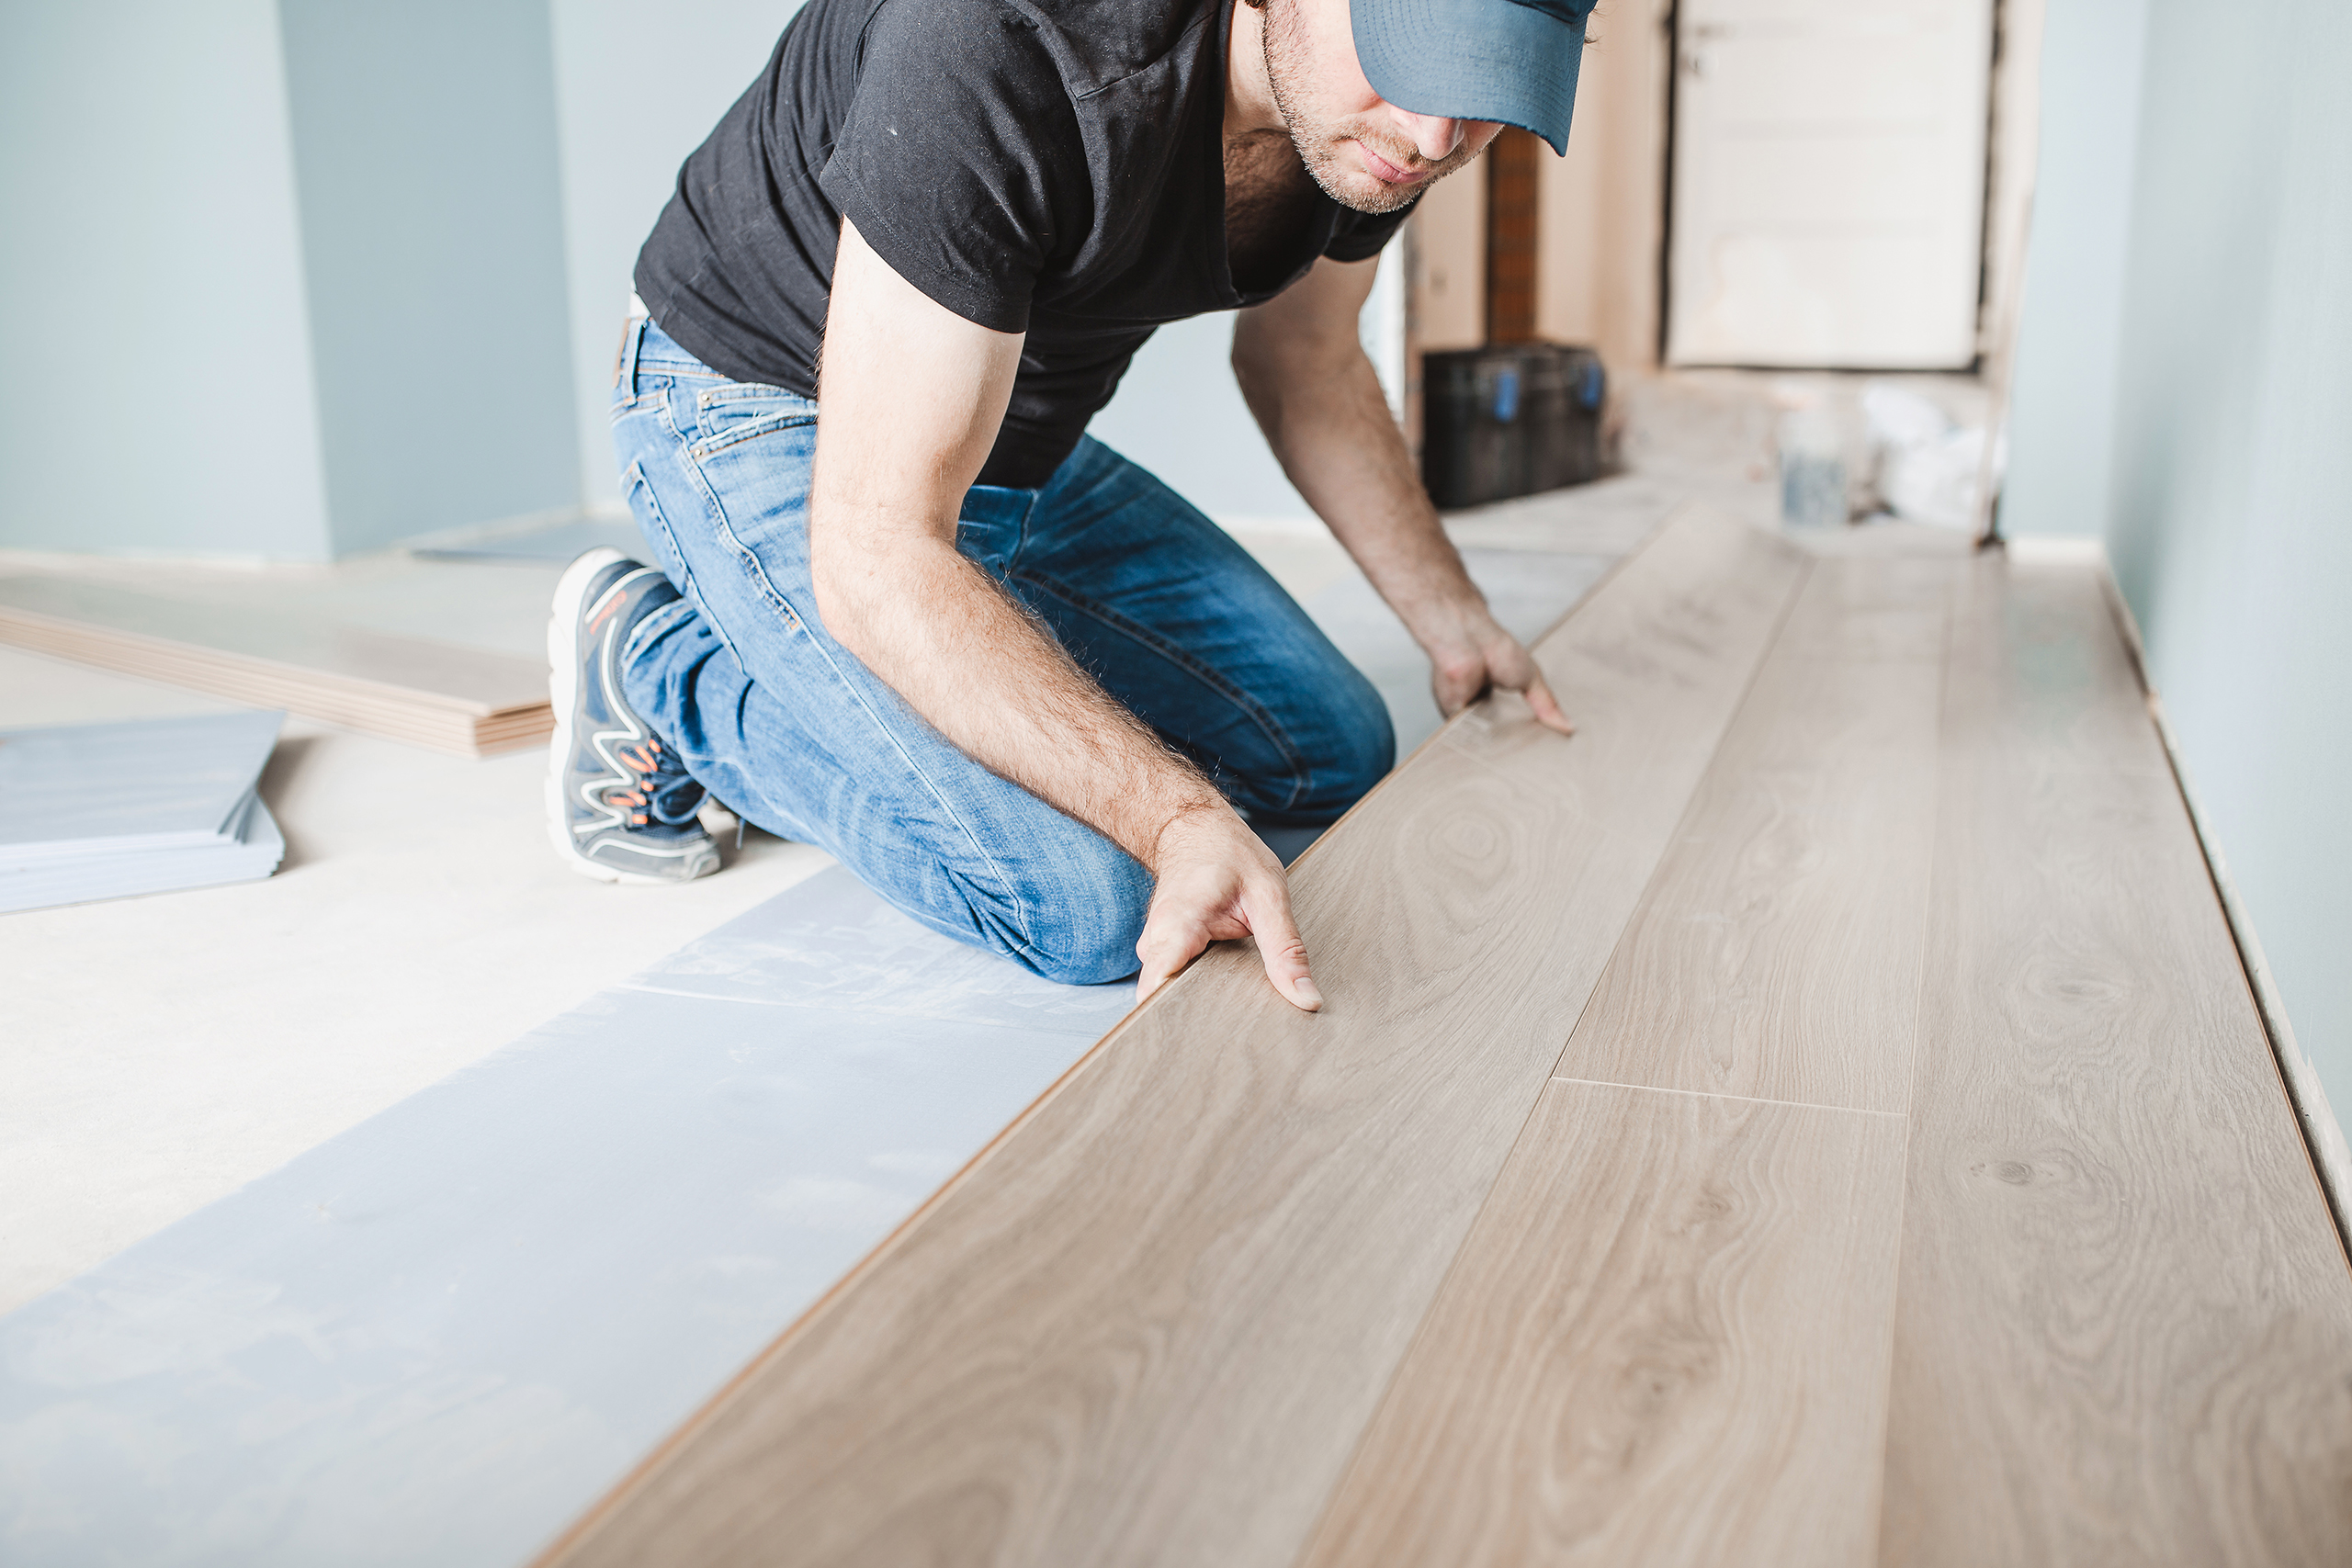 Transform Your Home's Market Appeal with New Luxury Vinyl Flooring